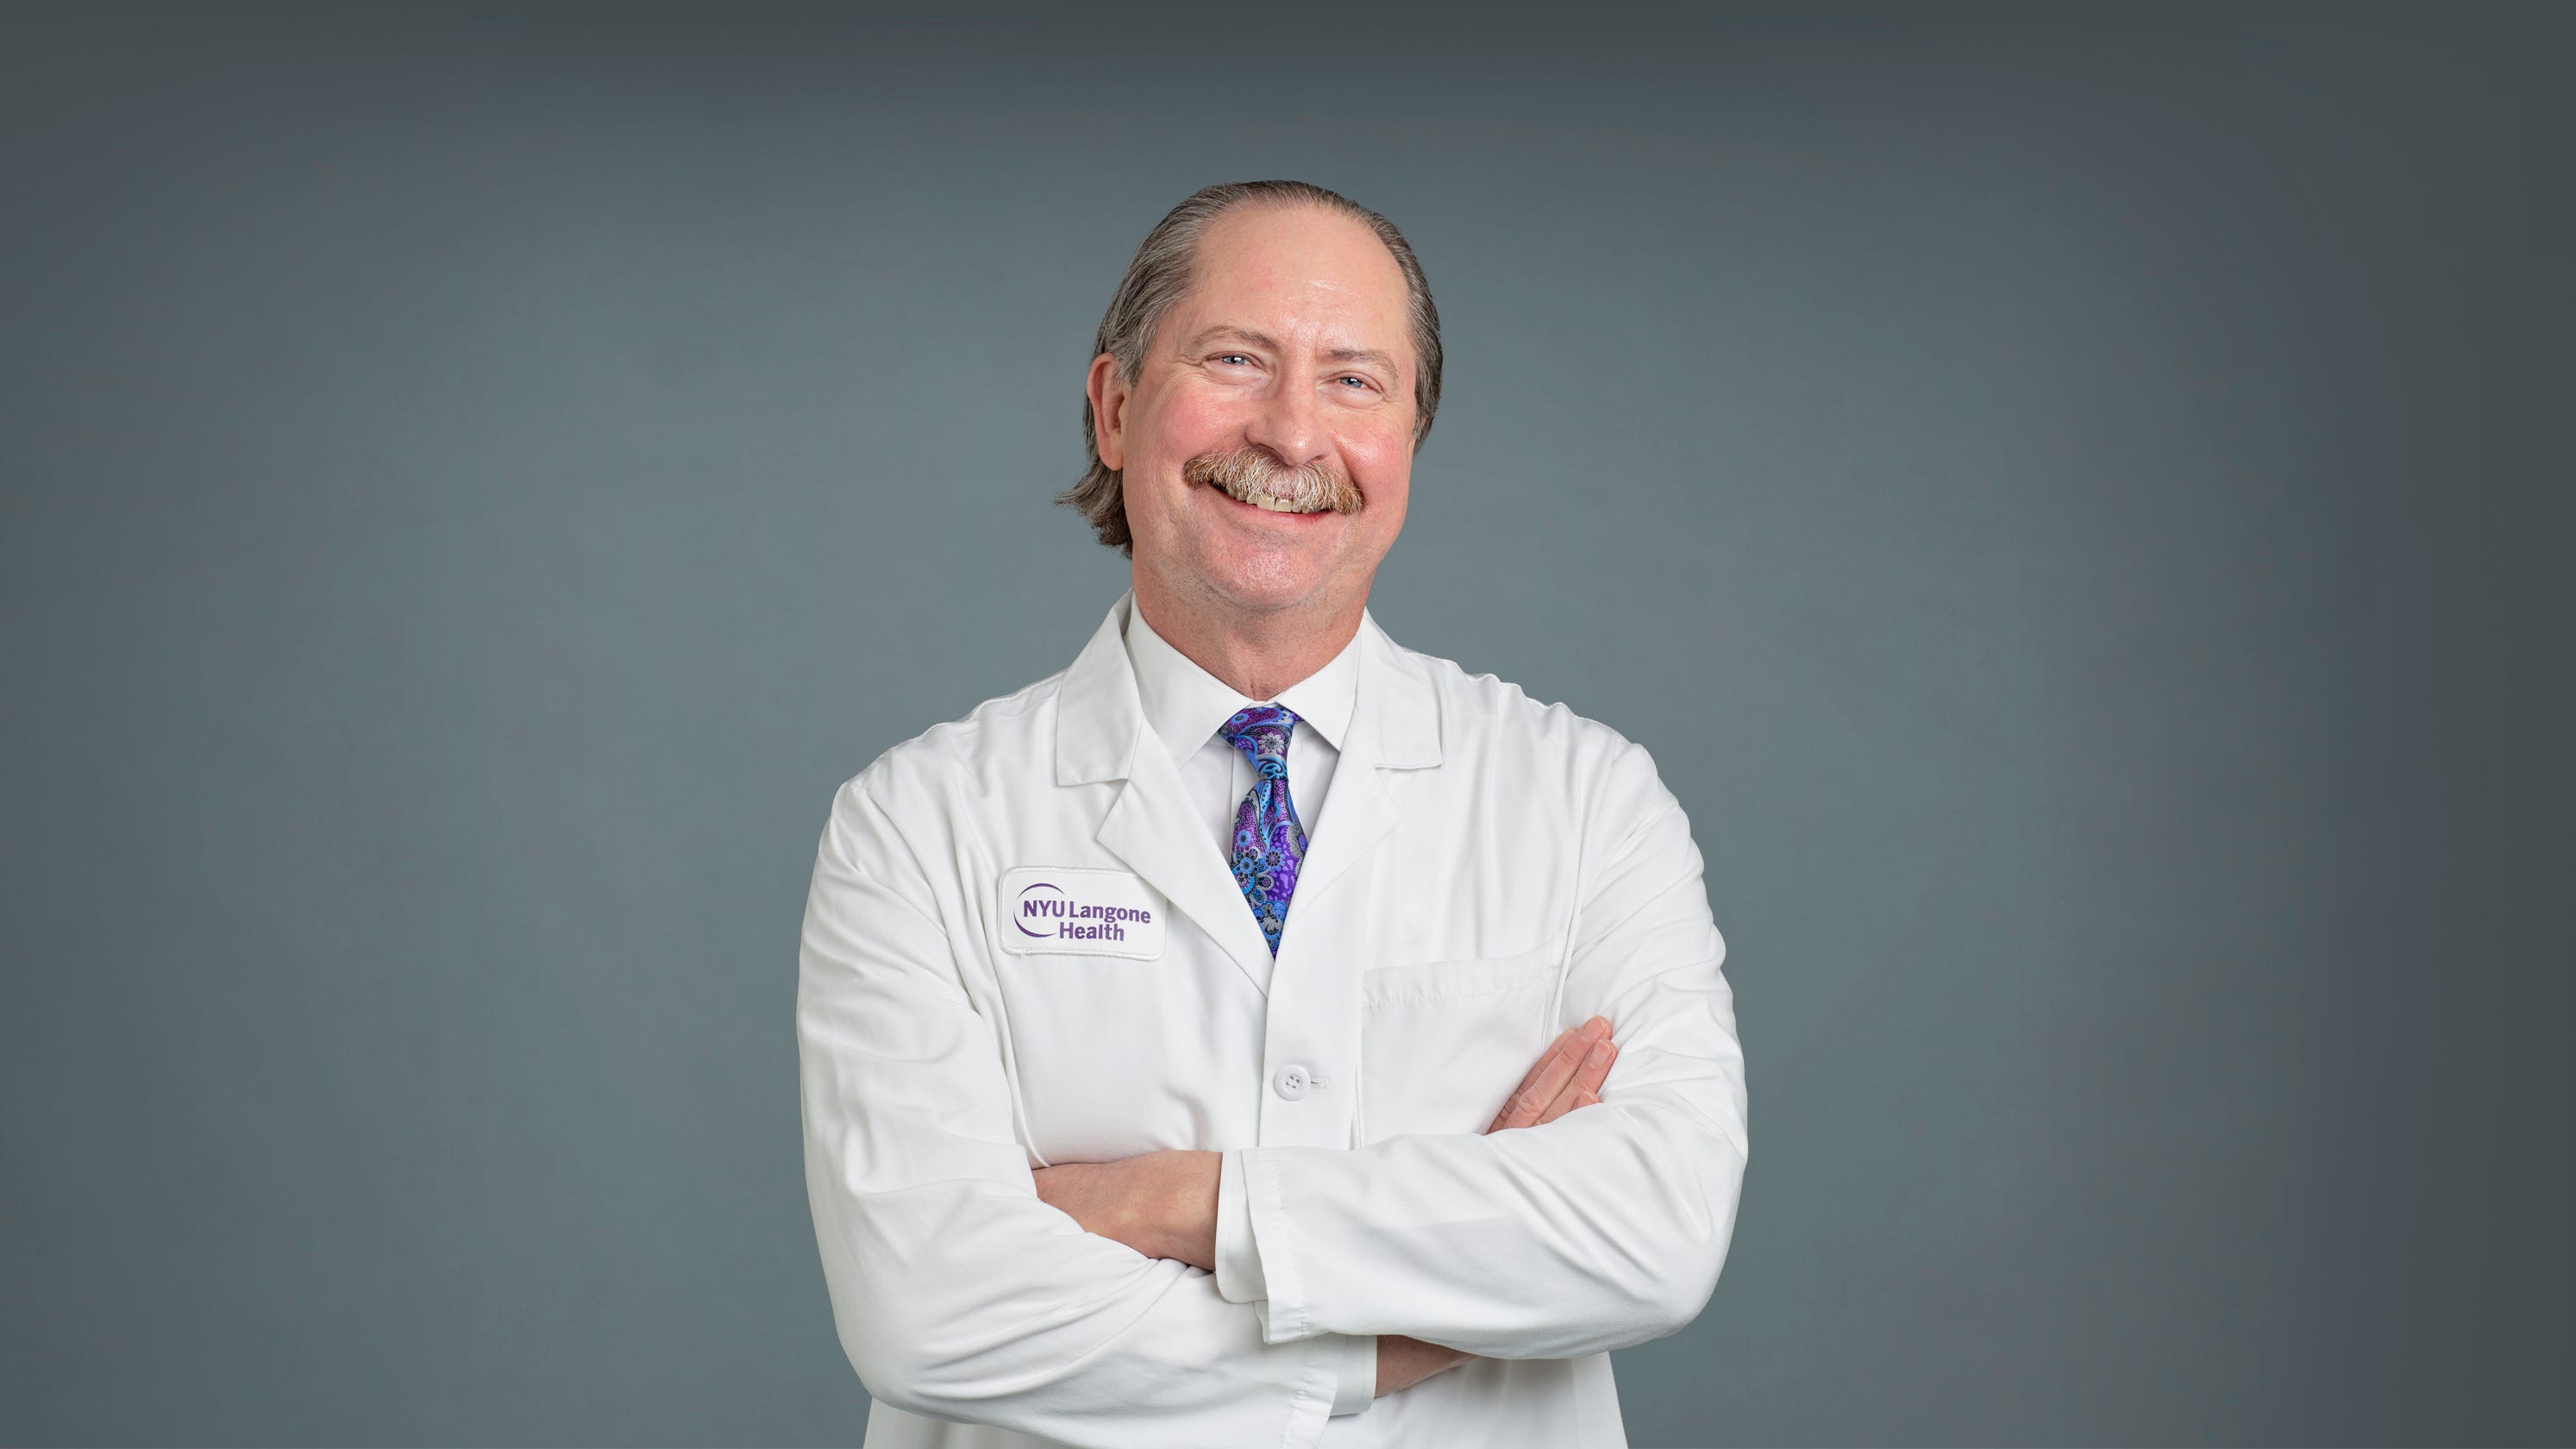 Dr. Robert Montgomery, who directs the Transplant Institute at NYU Langone Medical Center, is also a heart transplant recipient.